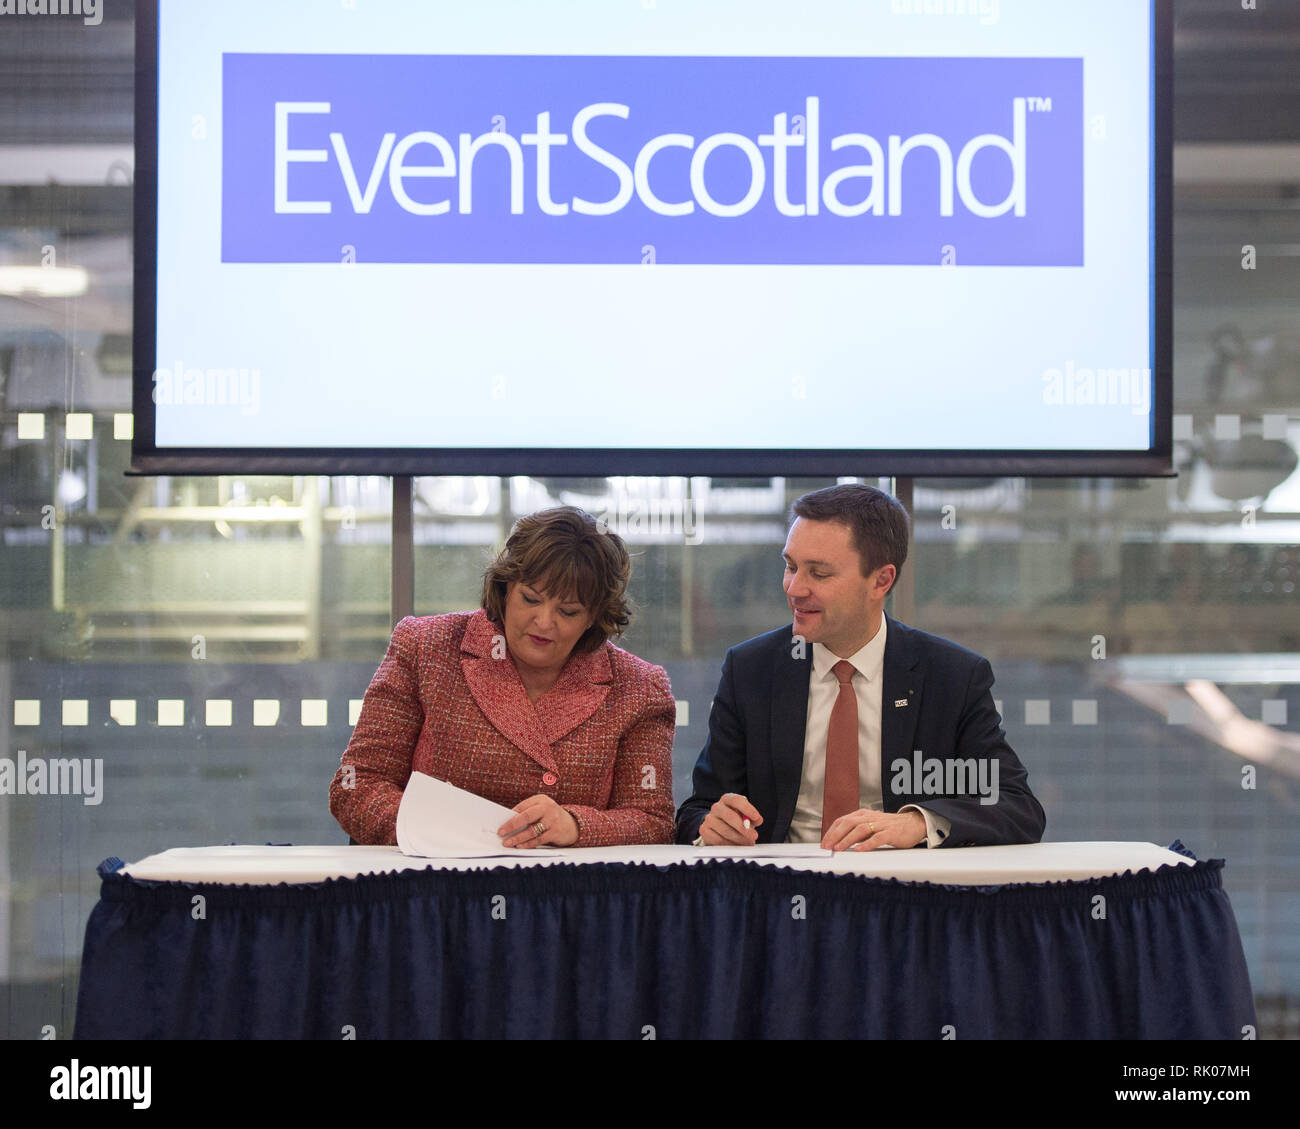 Glasgow, UK. 8 Feb 2019. (left) Fiona Hyslop MSP - Cabinet Secretary for Culture, Tourism and External Affairs, and (right) David Lappartient - President of the Union Cycliste Internationale signing an agreement.  A new multi-disciplinary cycling event will bring together 13 existing UCI cycling World Championships into one event to be held every four years, commencing in Glasgow and Scotland in 2023. Credit: Colin Fisher/Alamy Live News Stock Photo